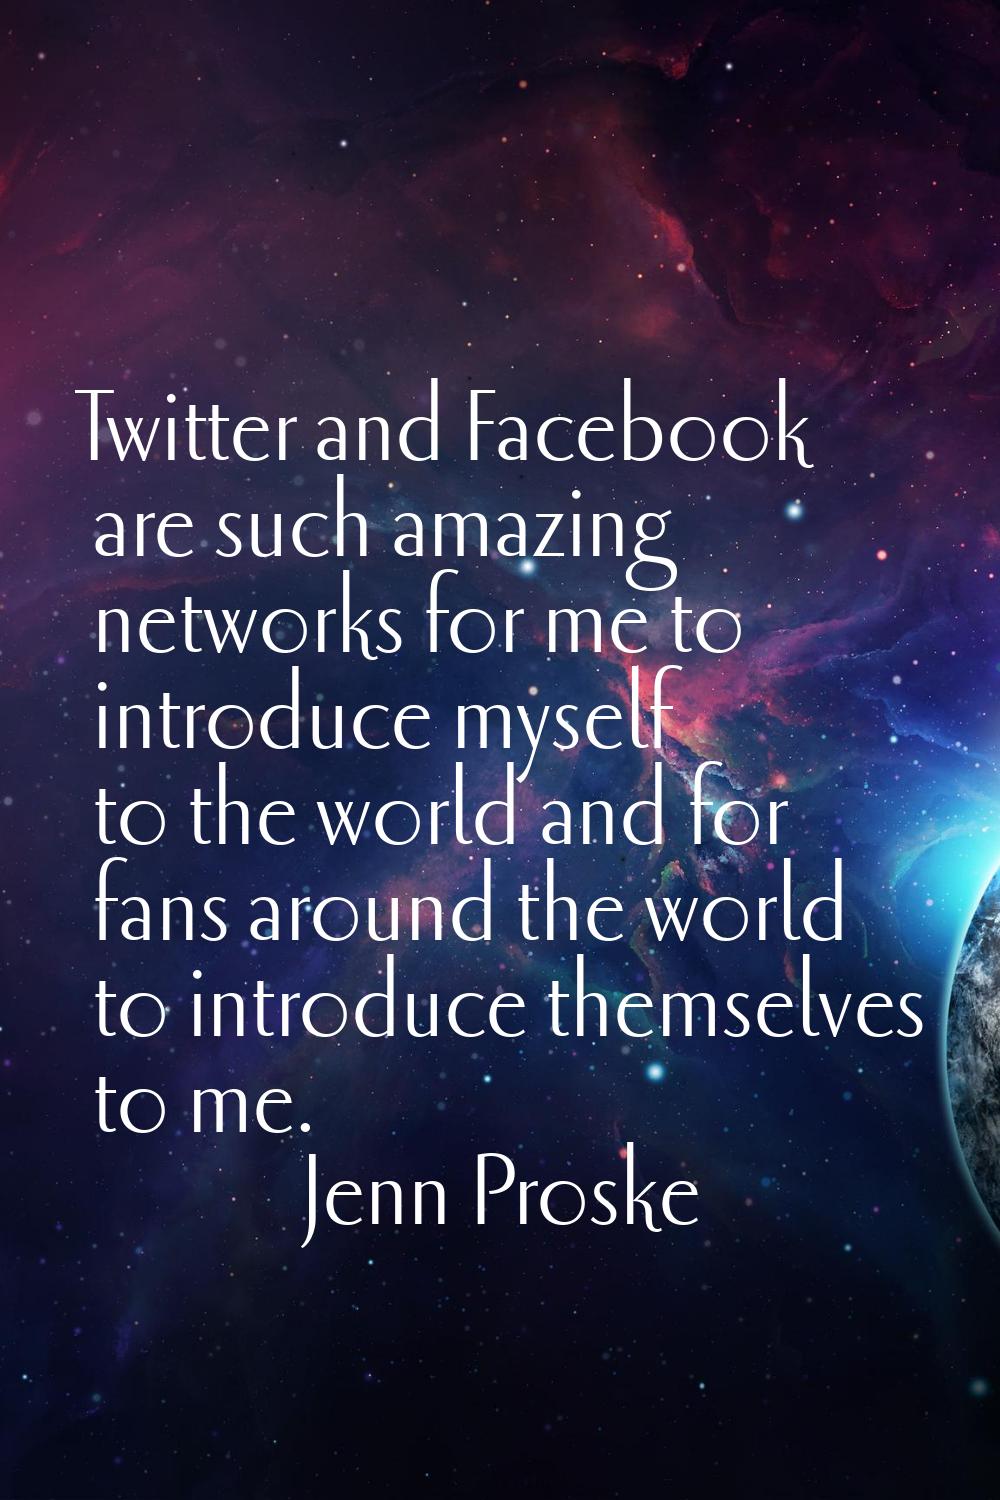 Twitter and Facebook are such amazing networks for me to introduce myself to the world and for fans